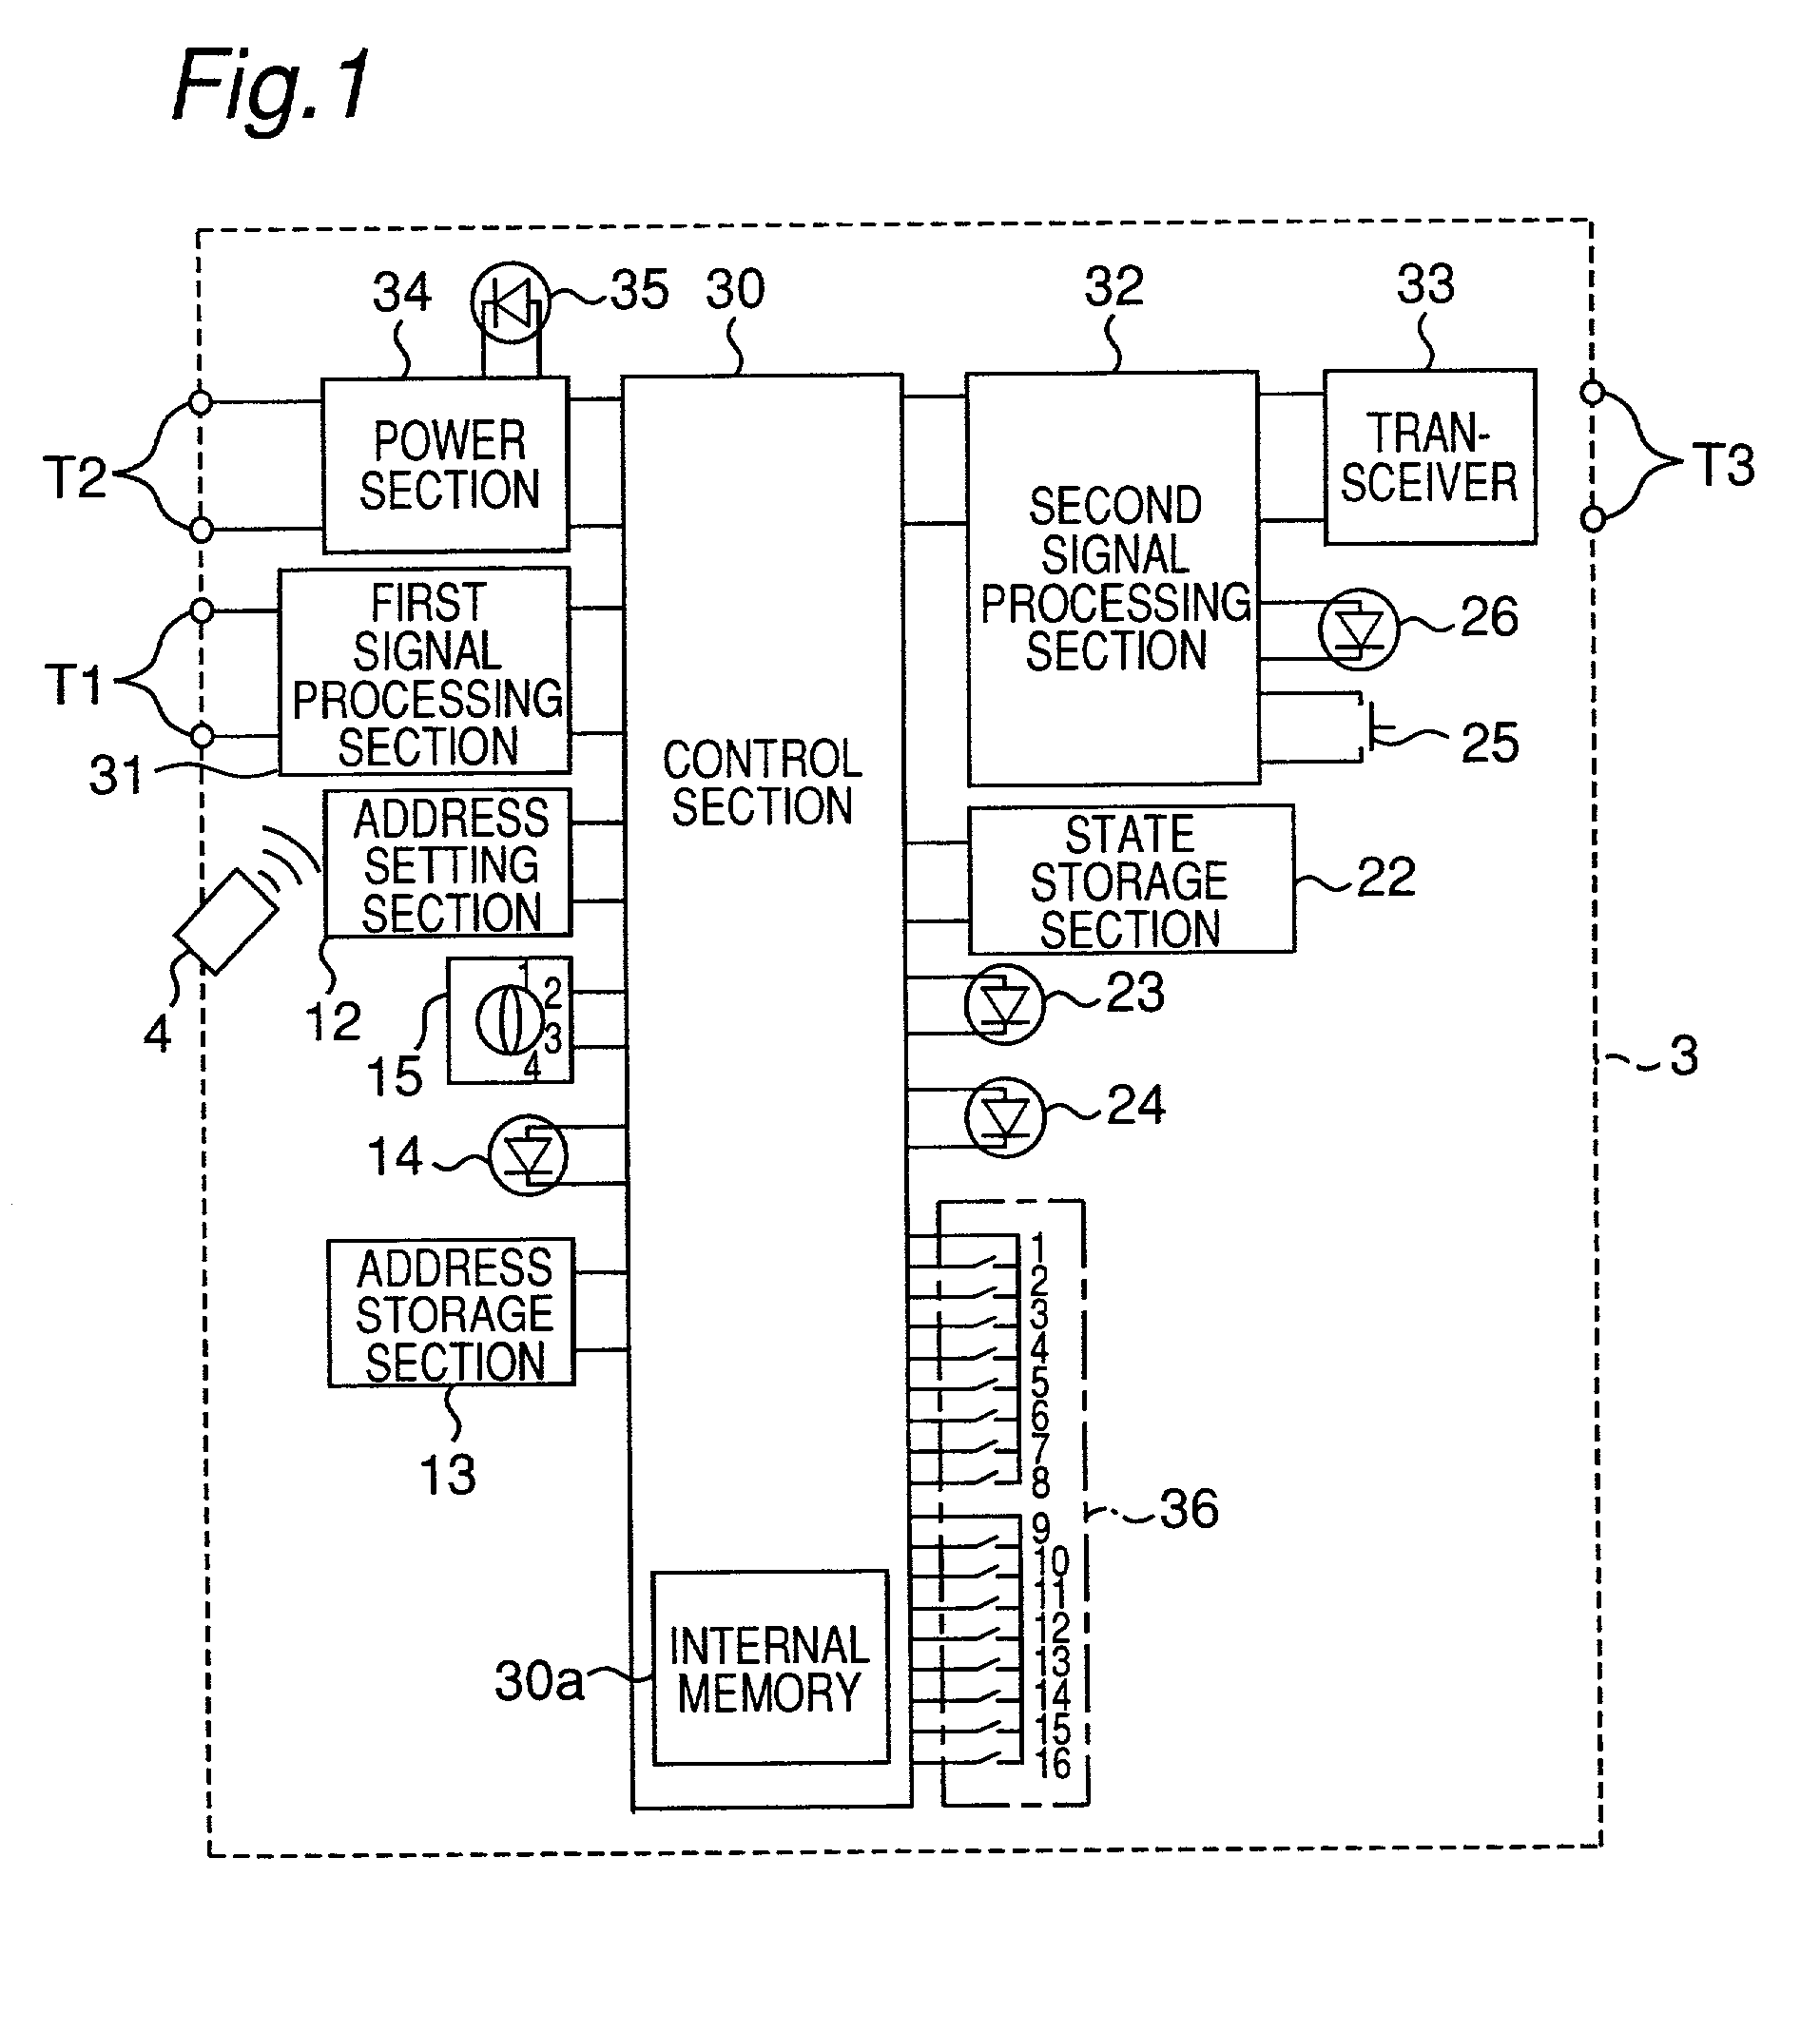 Interface apparatus provided between two remote control systems having different transmission modes